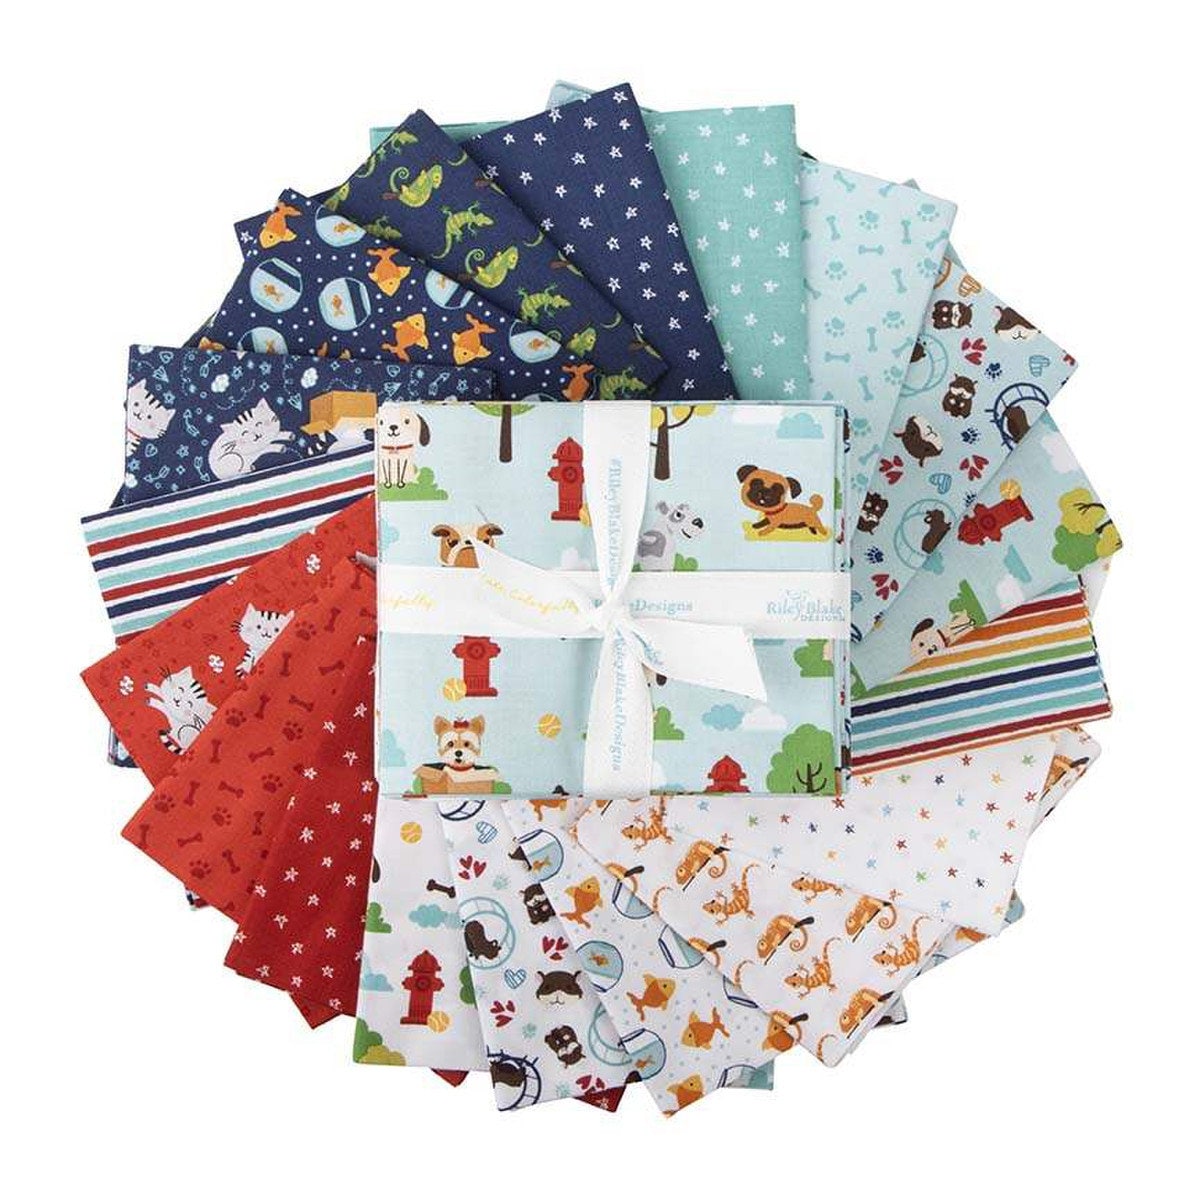 GORGECRAFT 8PCS 20 x 20 Inch Animal Fat Quarters Fabric Bundles Cat Dog  Pattern Cotton Fabric Squares for Quilting Sewing Patchwork Cushions  Pillows 